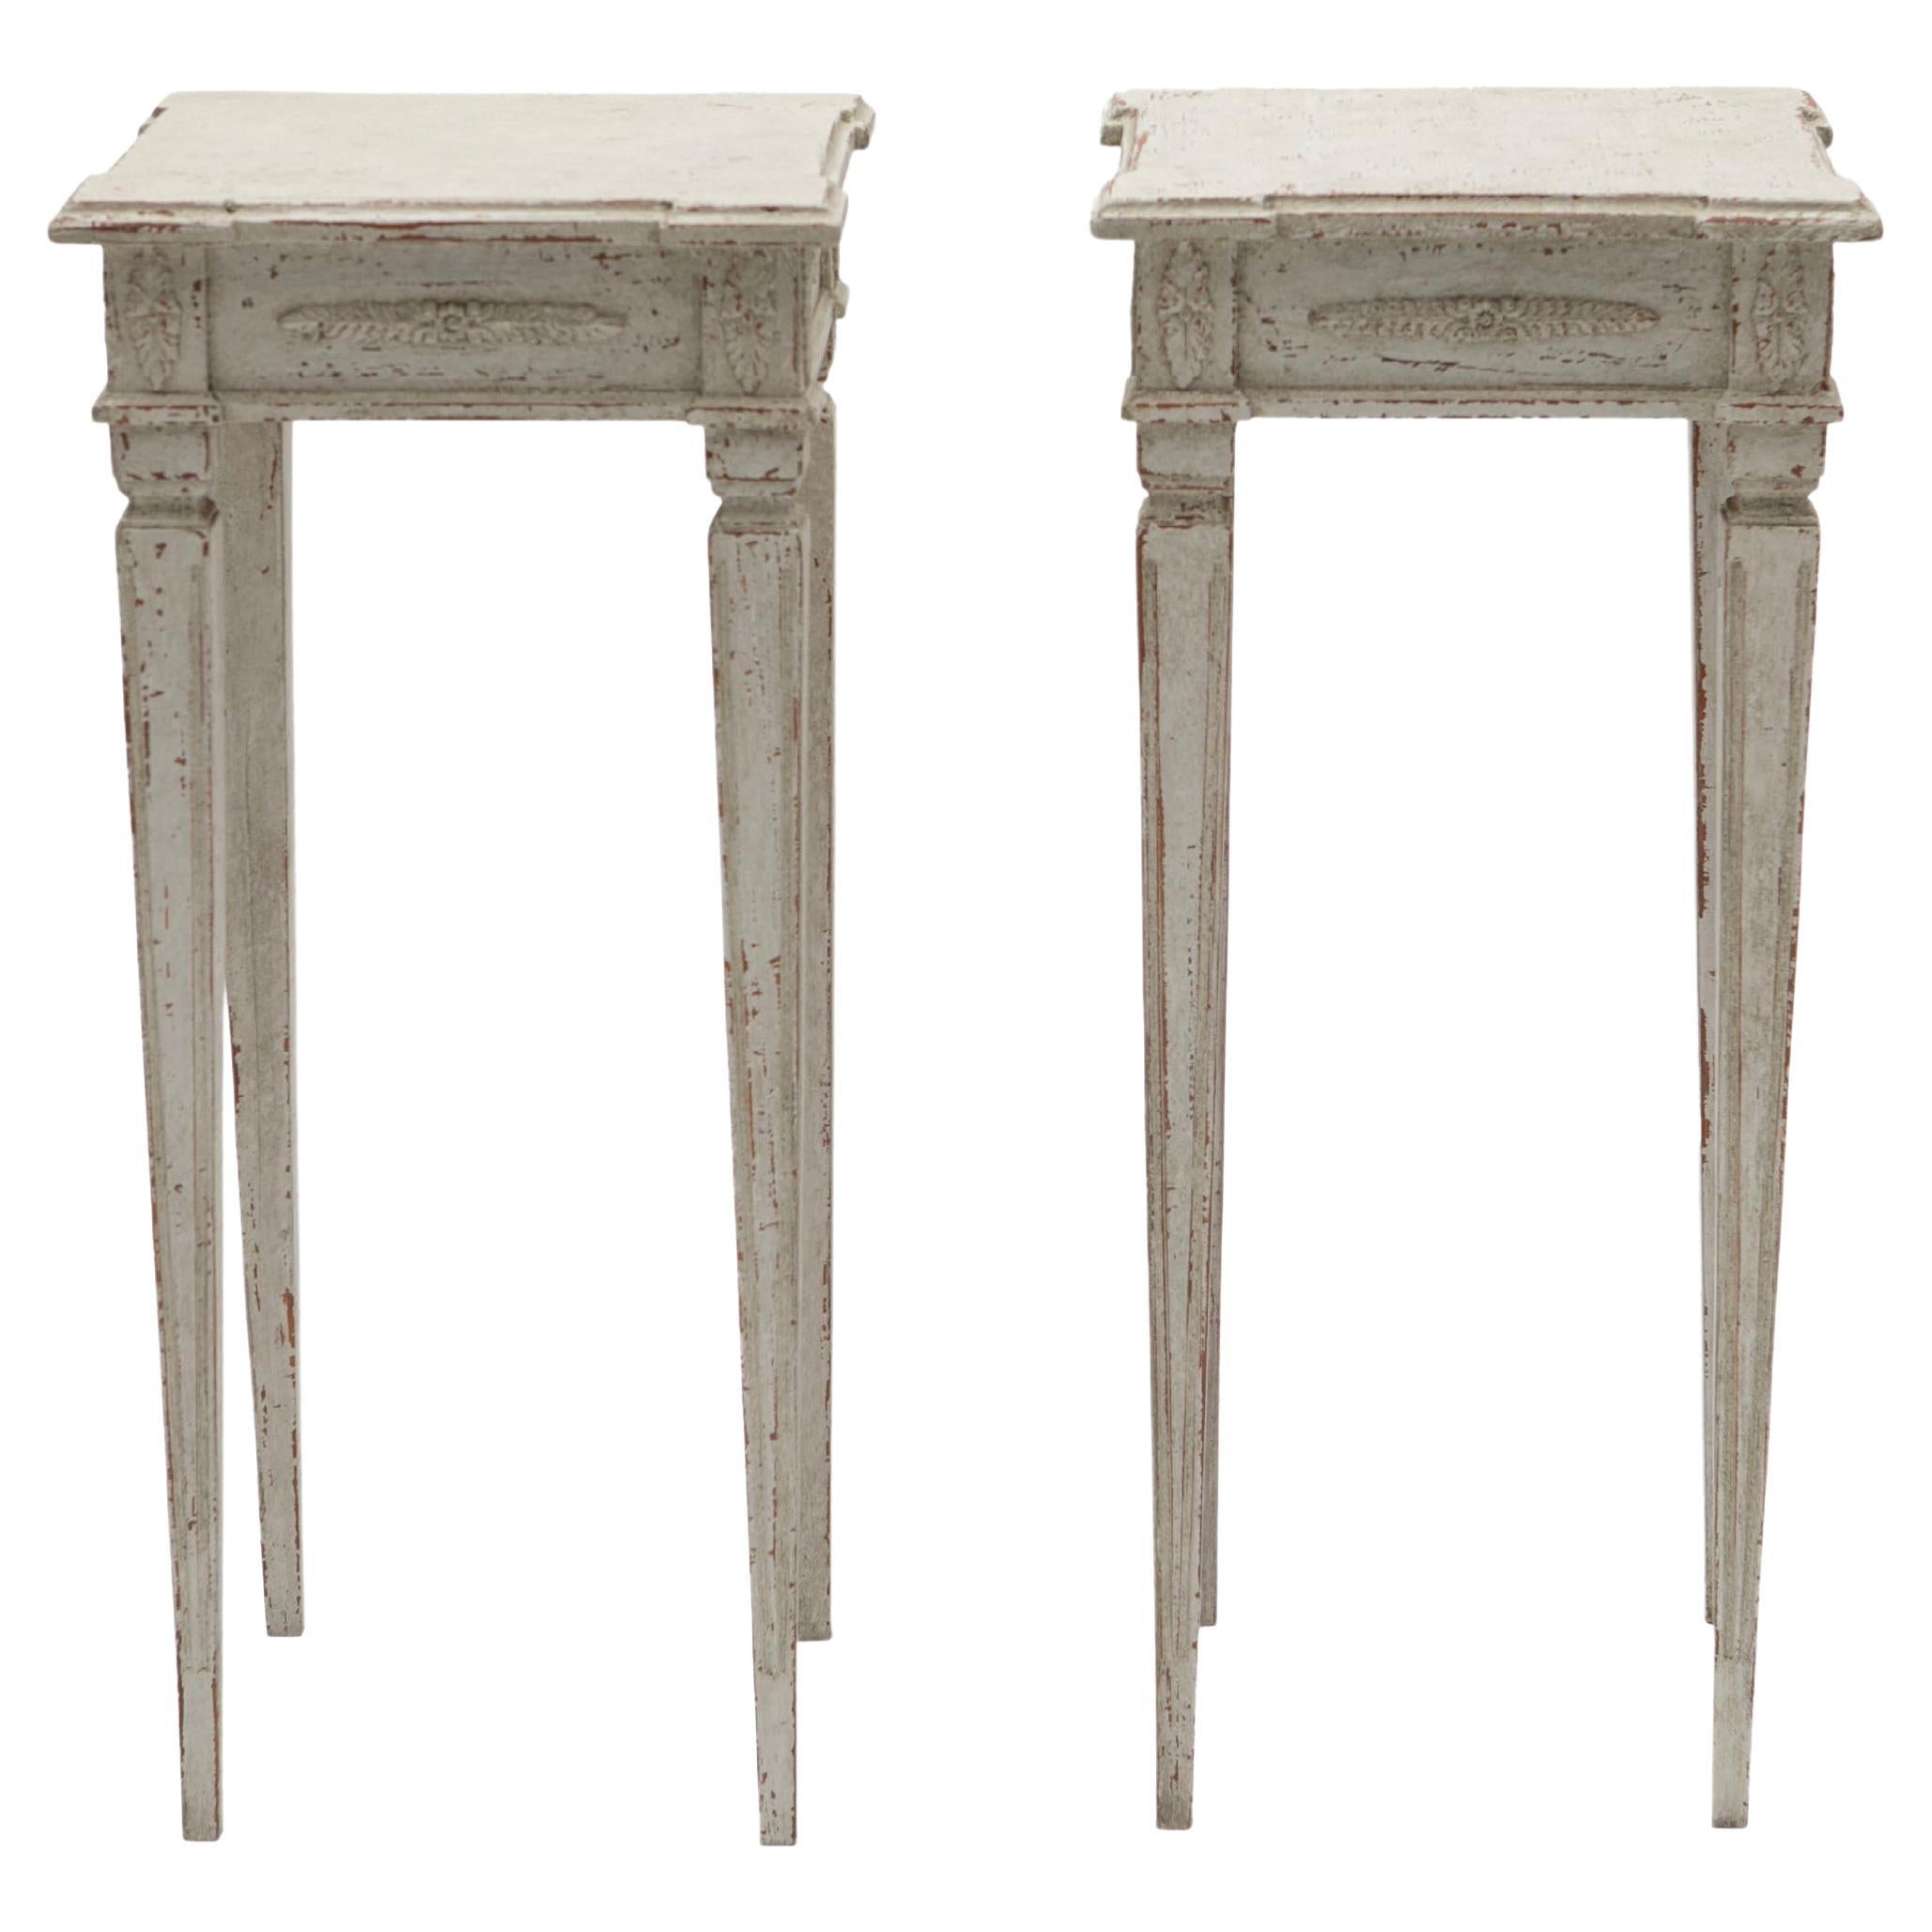 Pair of Light Grey Painted Swedish Gustavian Style Side Lamp Tables